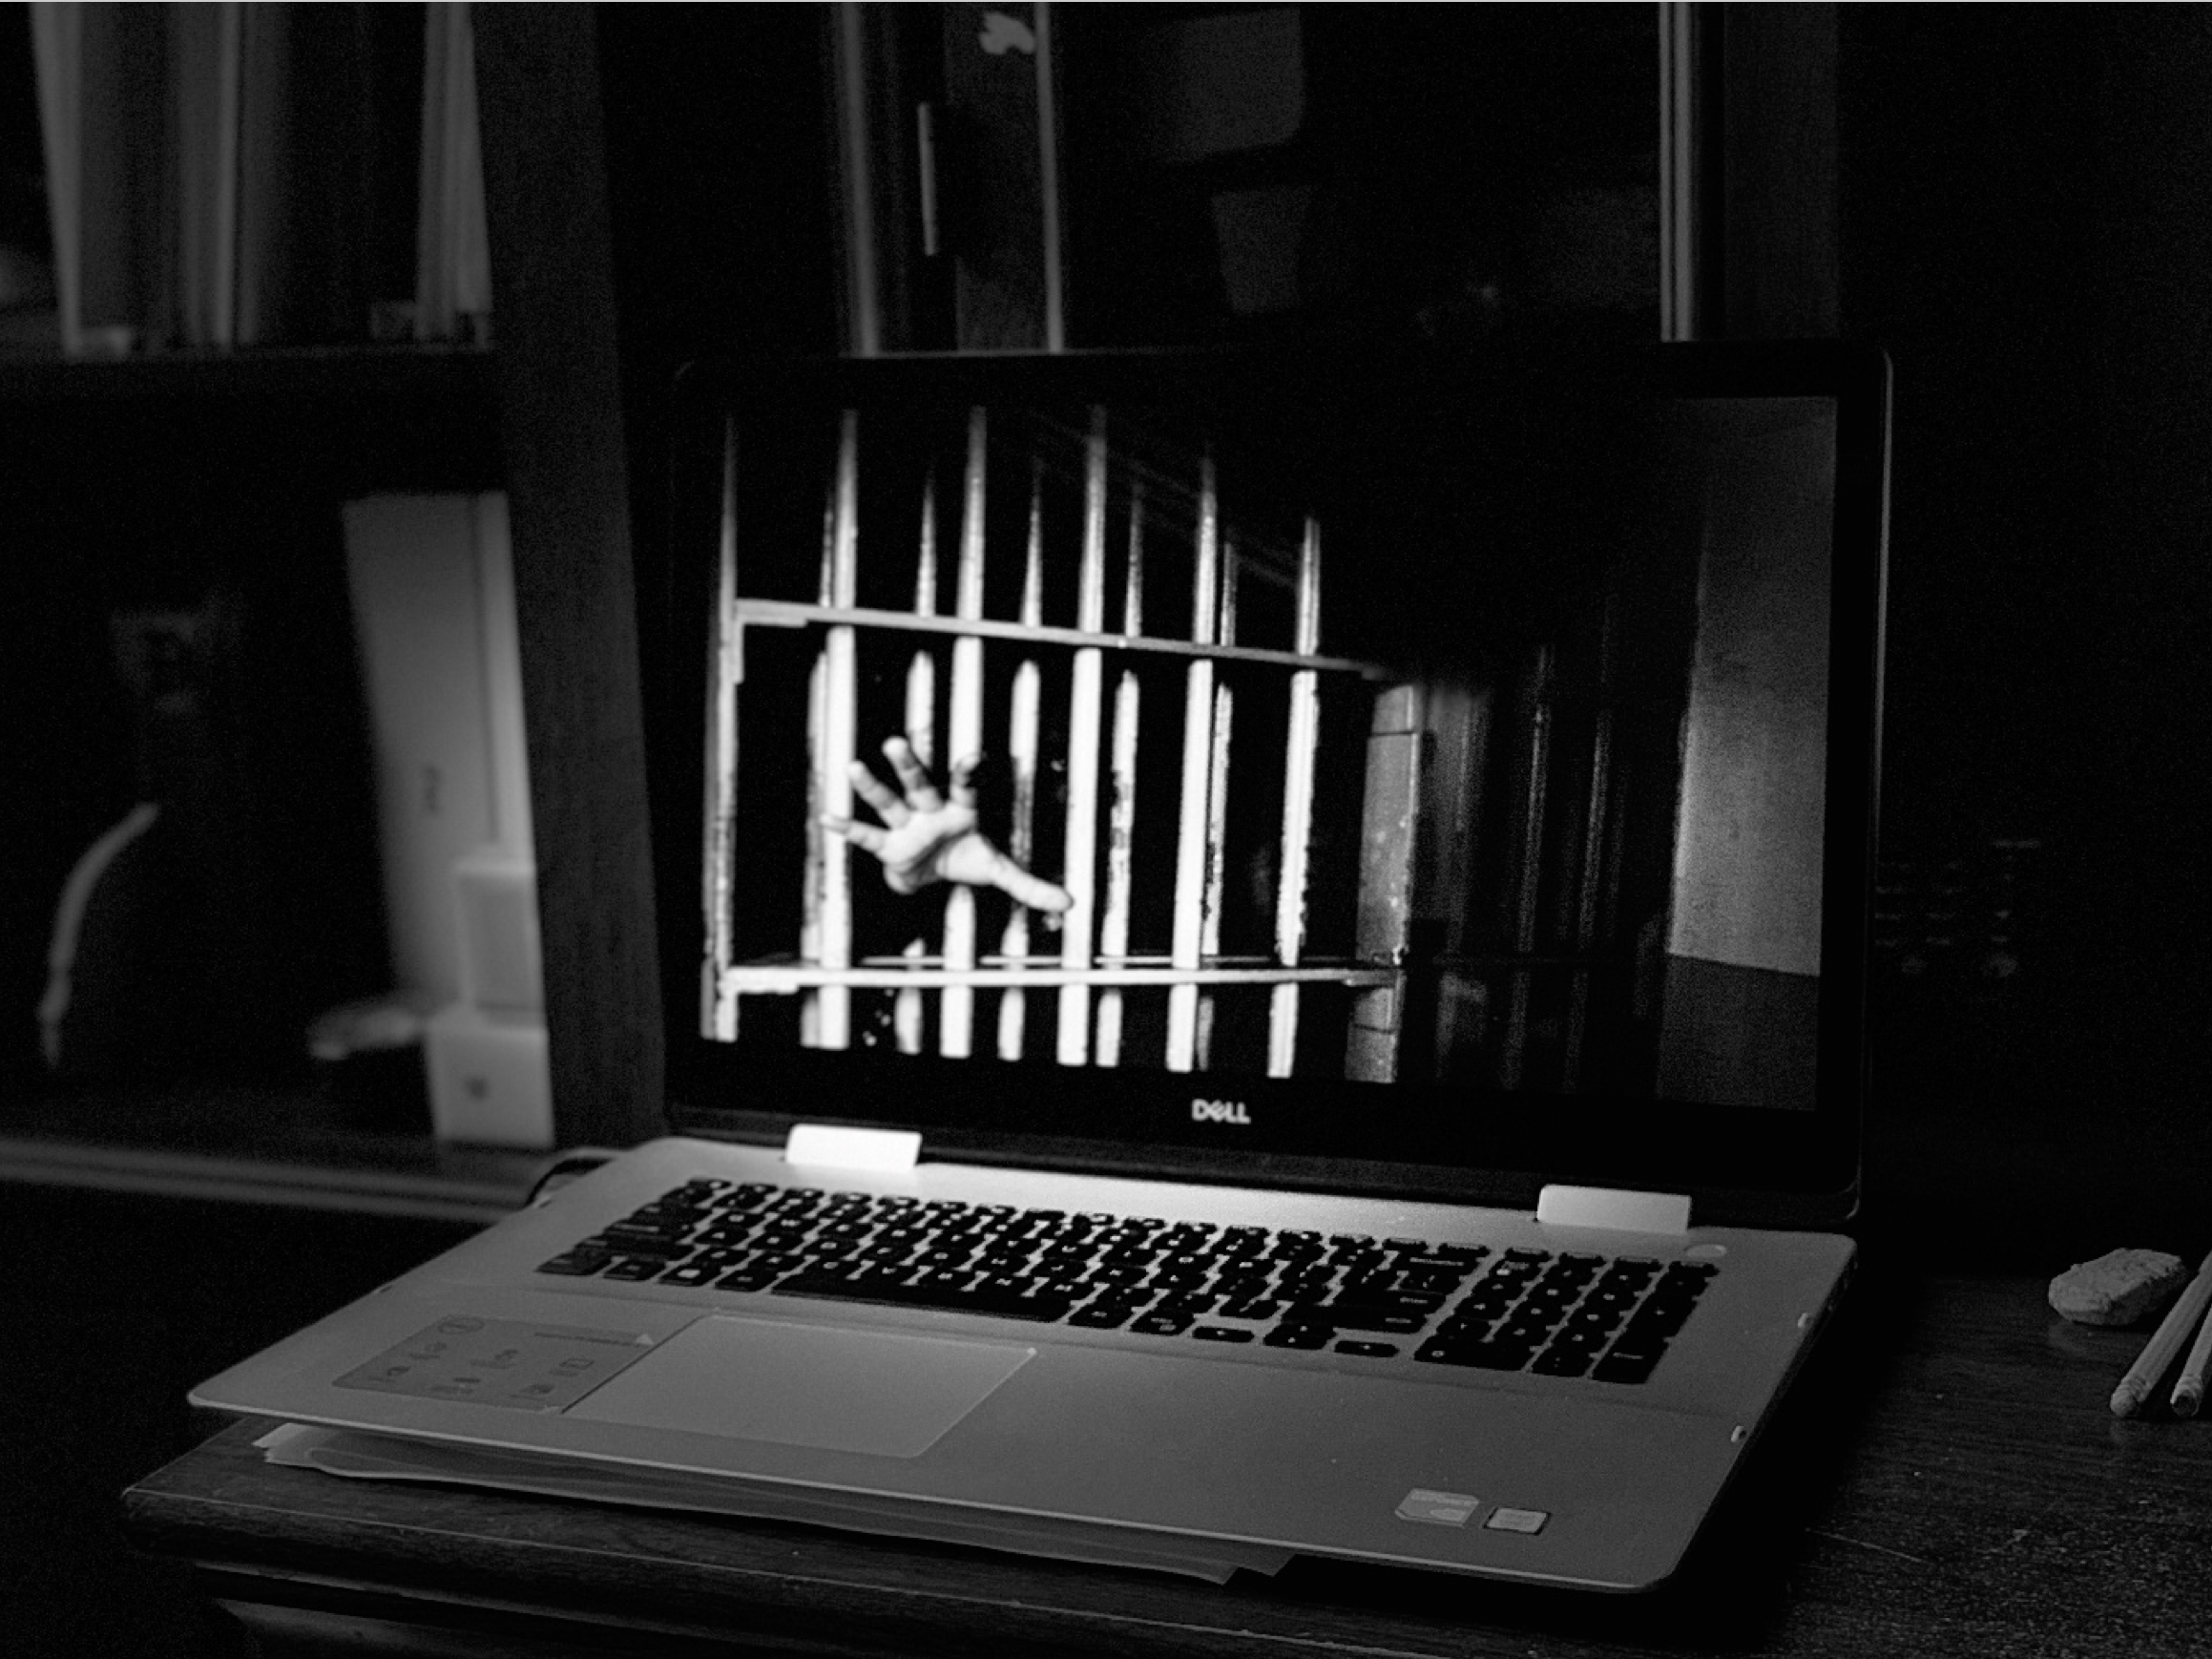 black and white image on computer laptop: hand reaching through bars